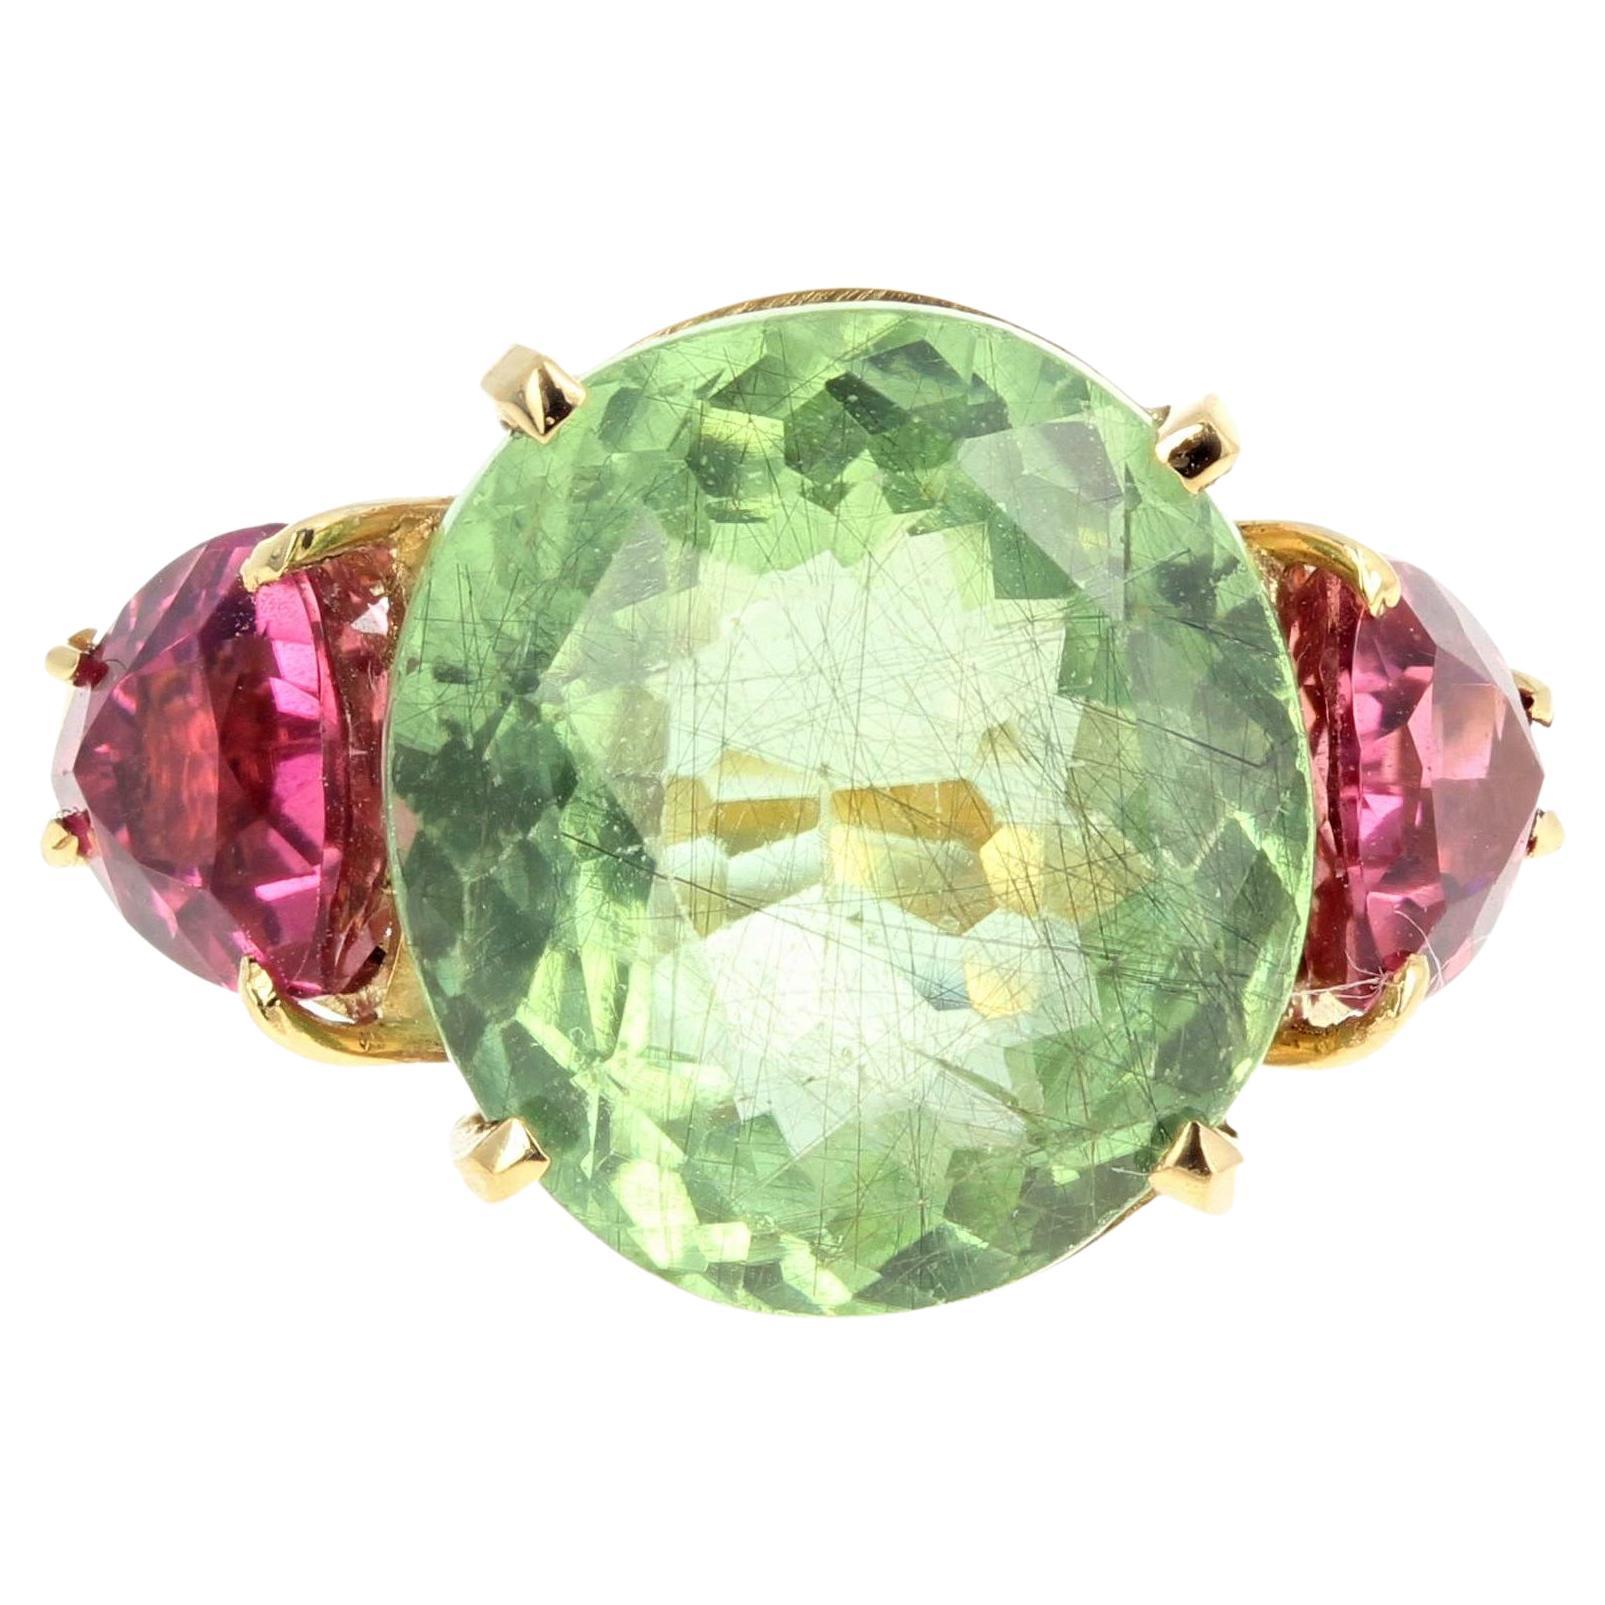 Unique 6 carat sparkling oval green Tourmaline (13 mm x 11.7 mm) enhanced with two glittering pink trillion cut Tourmalines (6 mm x 6 mm approximately) set in an 18 Kt yellow gold handmade ring size 5 (sizable). There are no eye visible inclusions